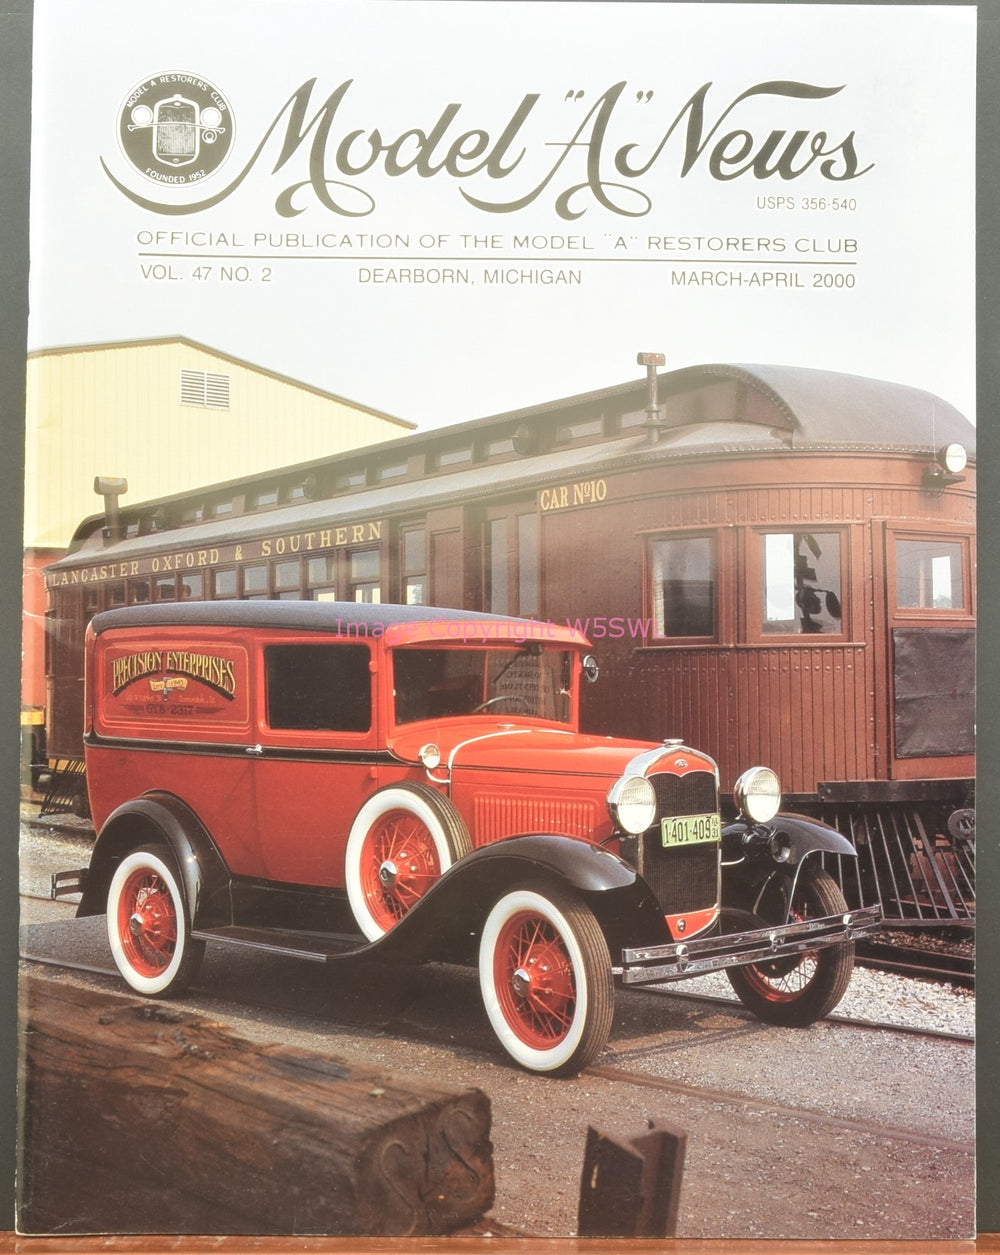 Model A News Restorers Club Vol 47 No 2 March-April 2000 - Dave's Hobby Shop by W5SWL